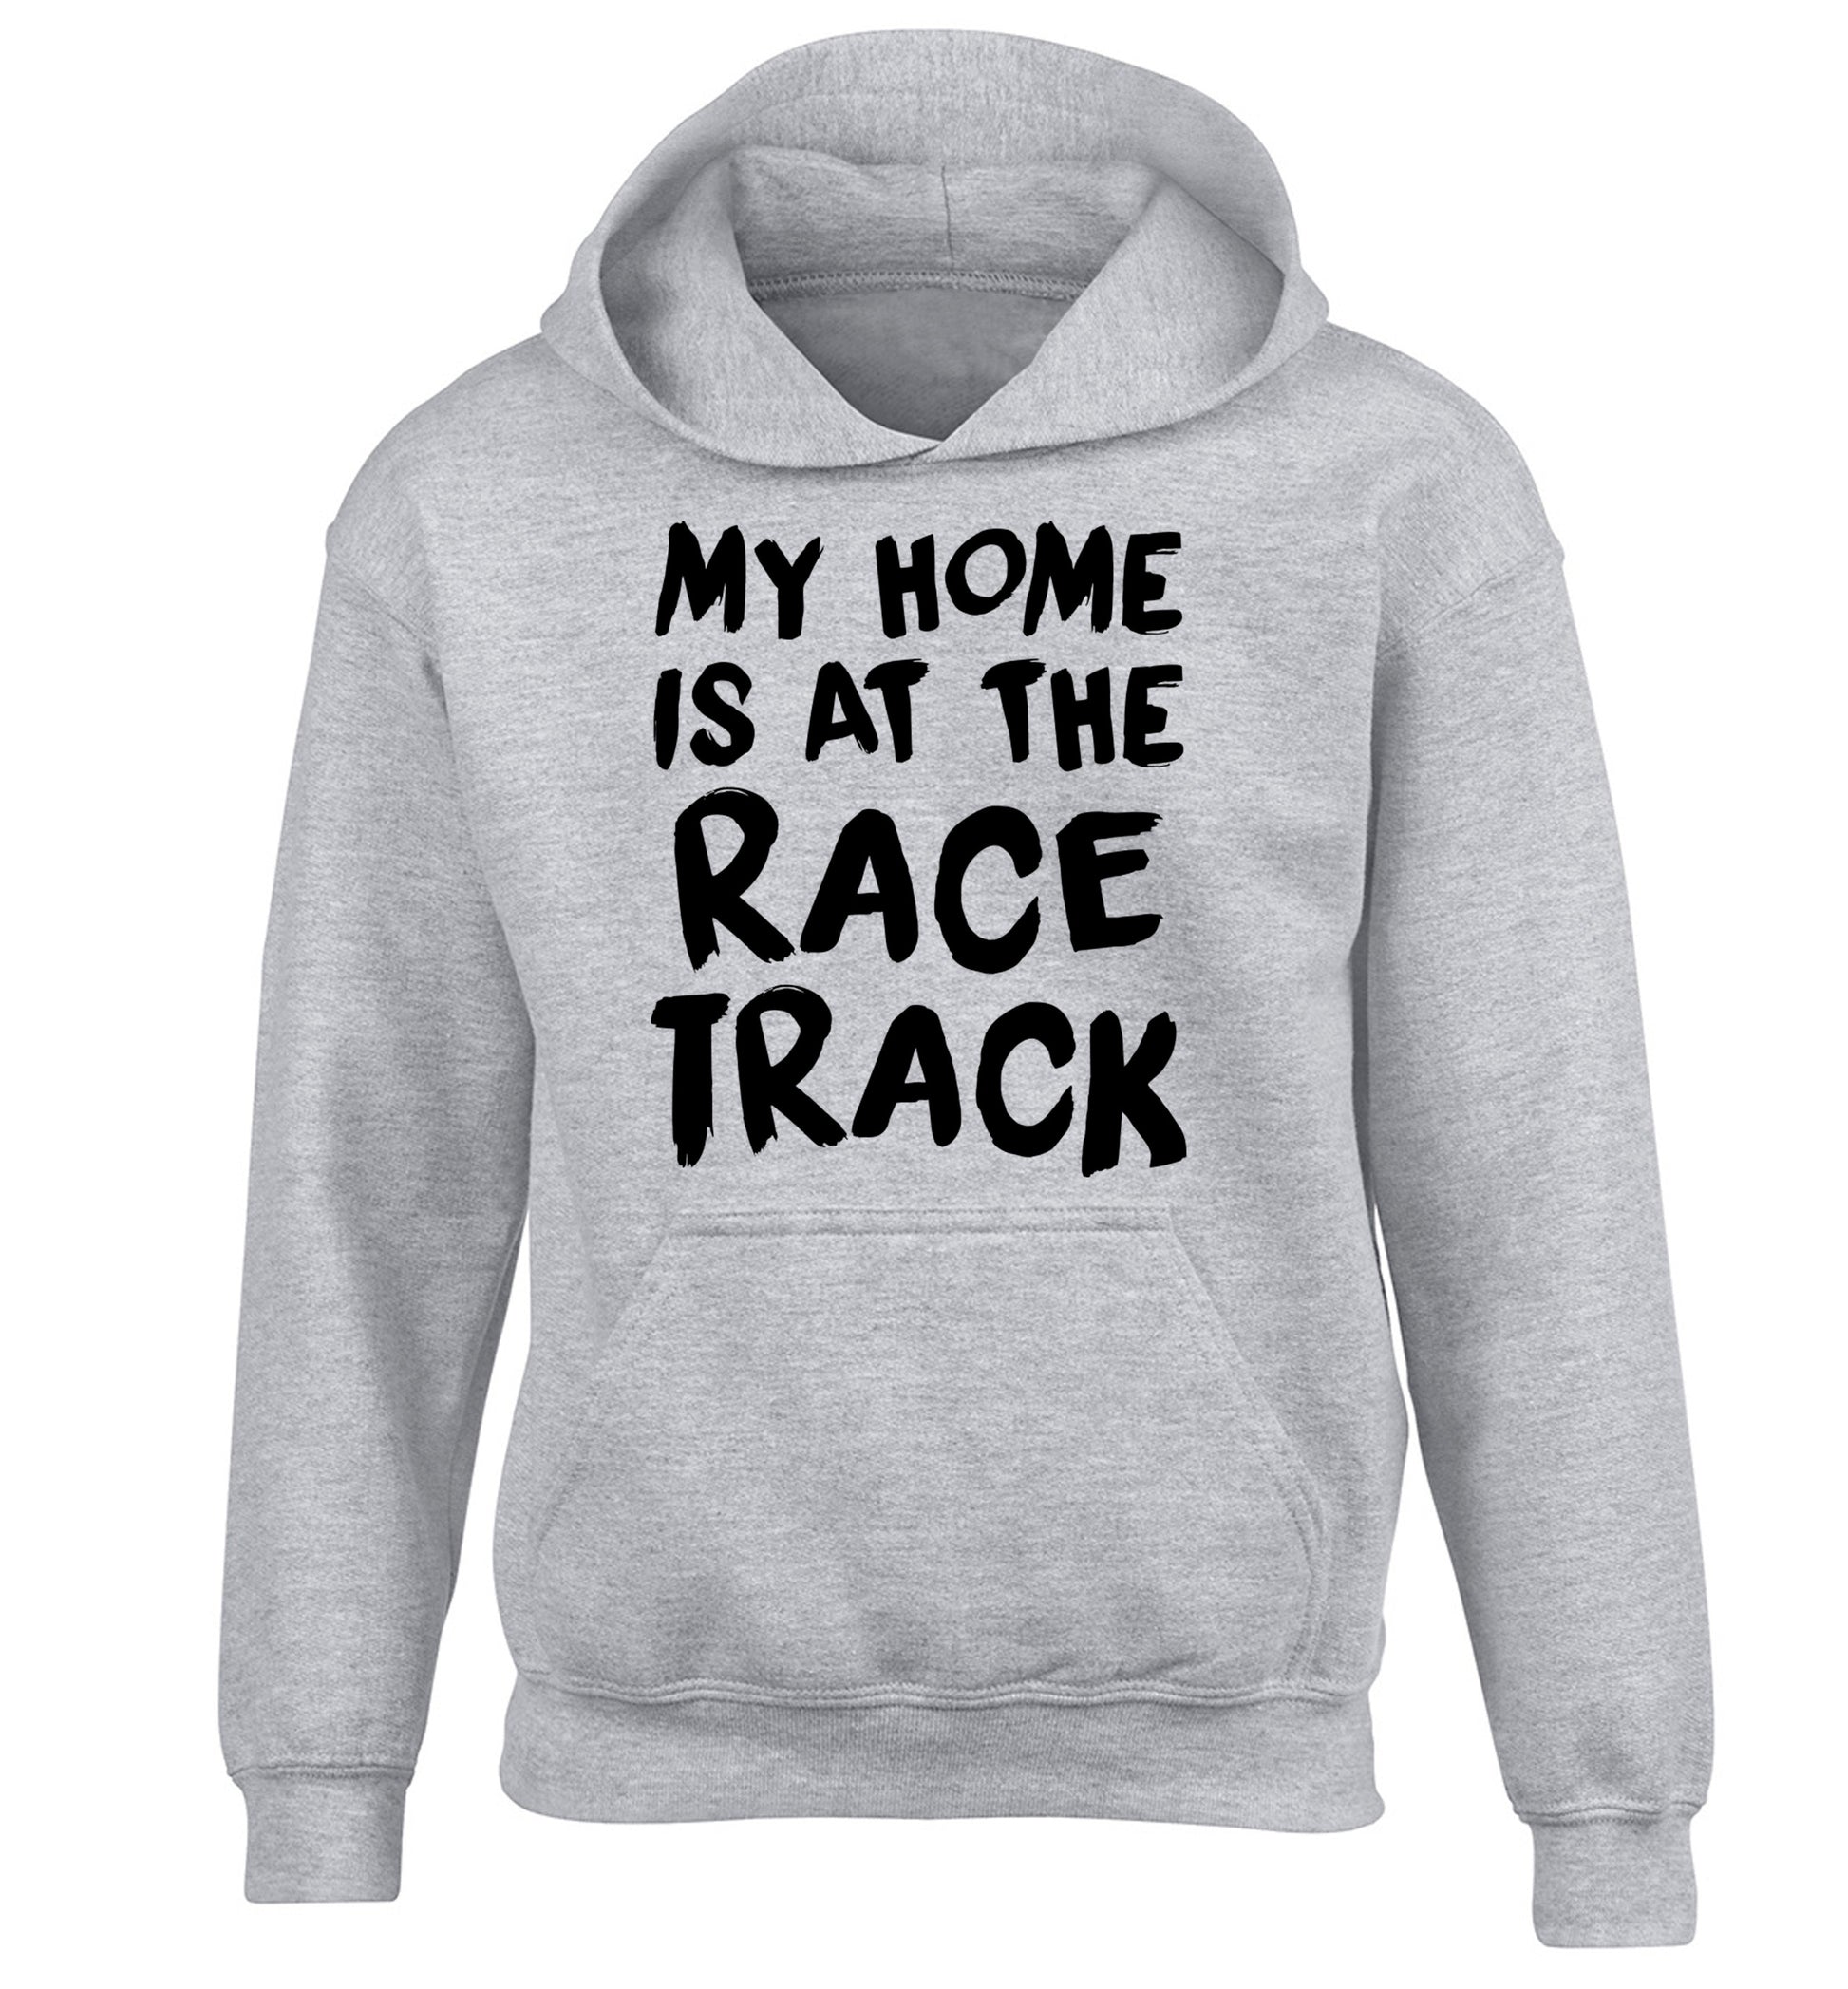 My home is at the race track children's grey hoodie 12-14 Years